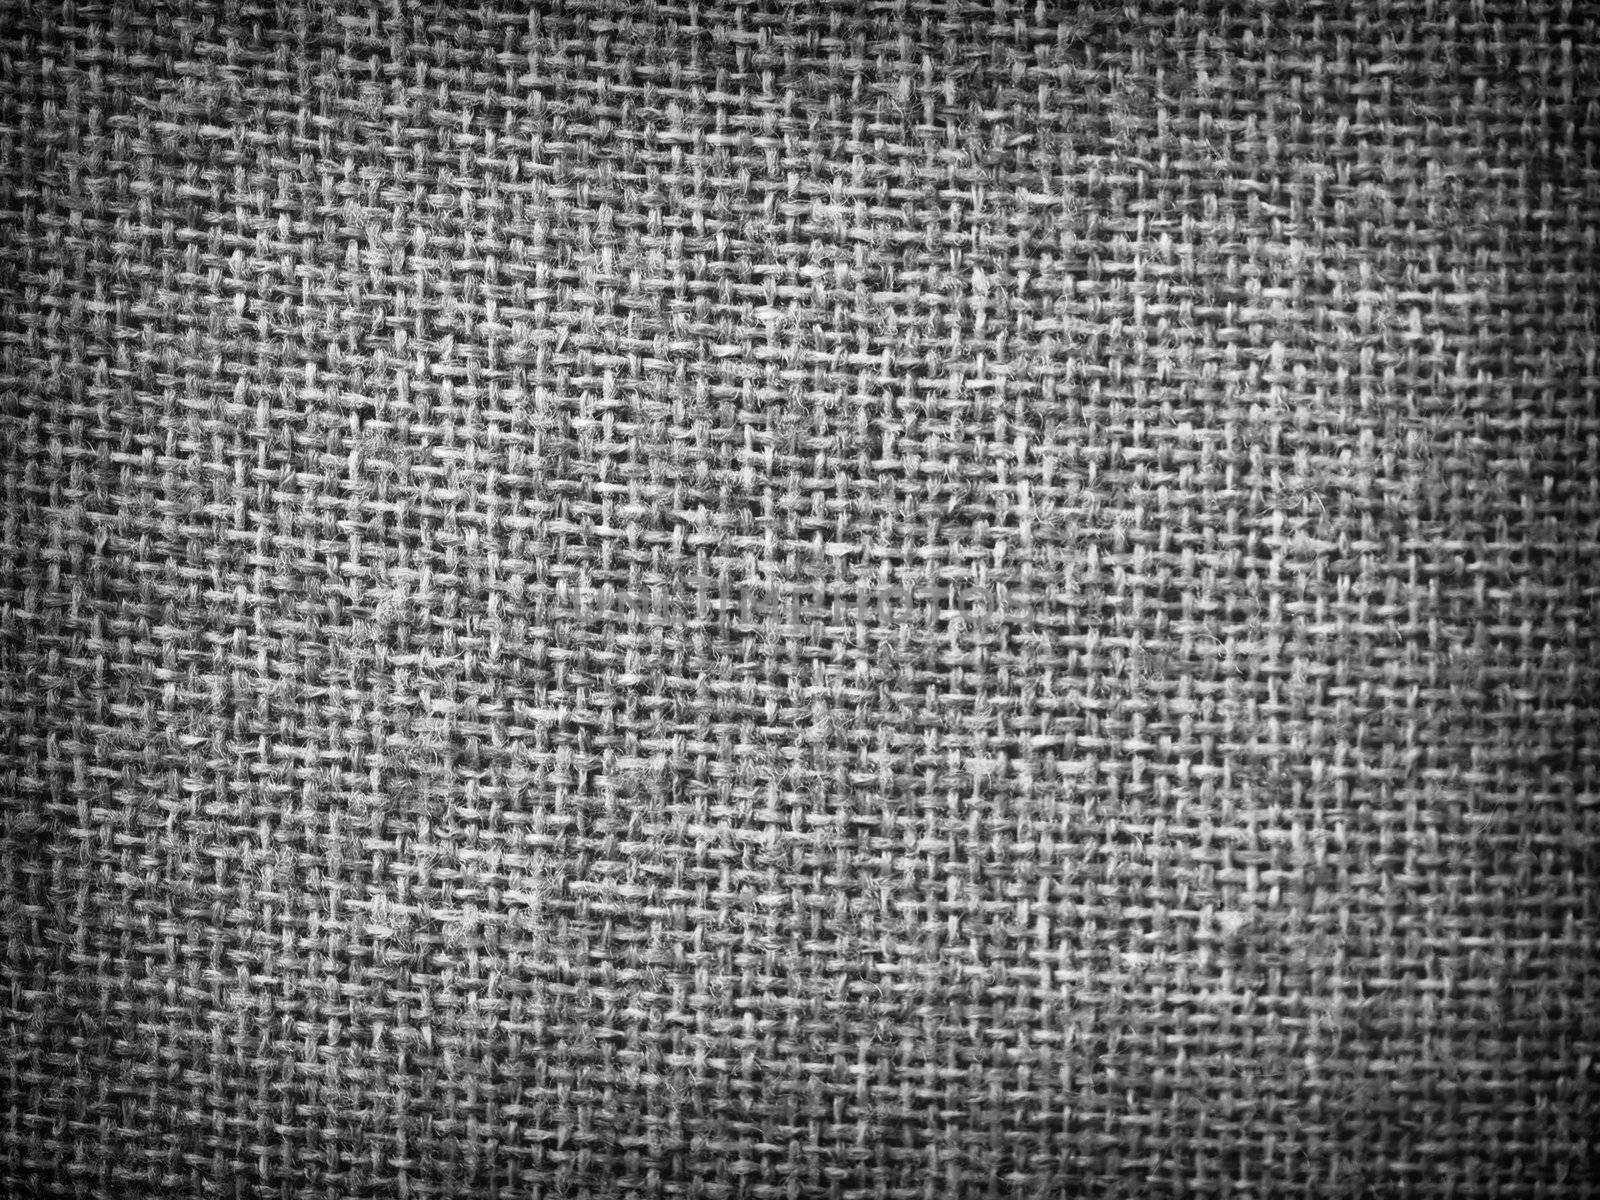 Burlap Gray Grunge Texture Background with Framed Copyspace 